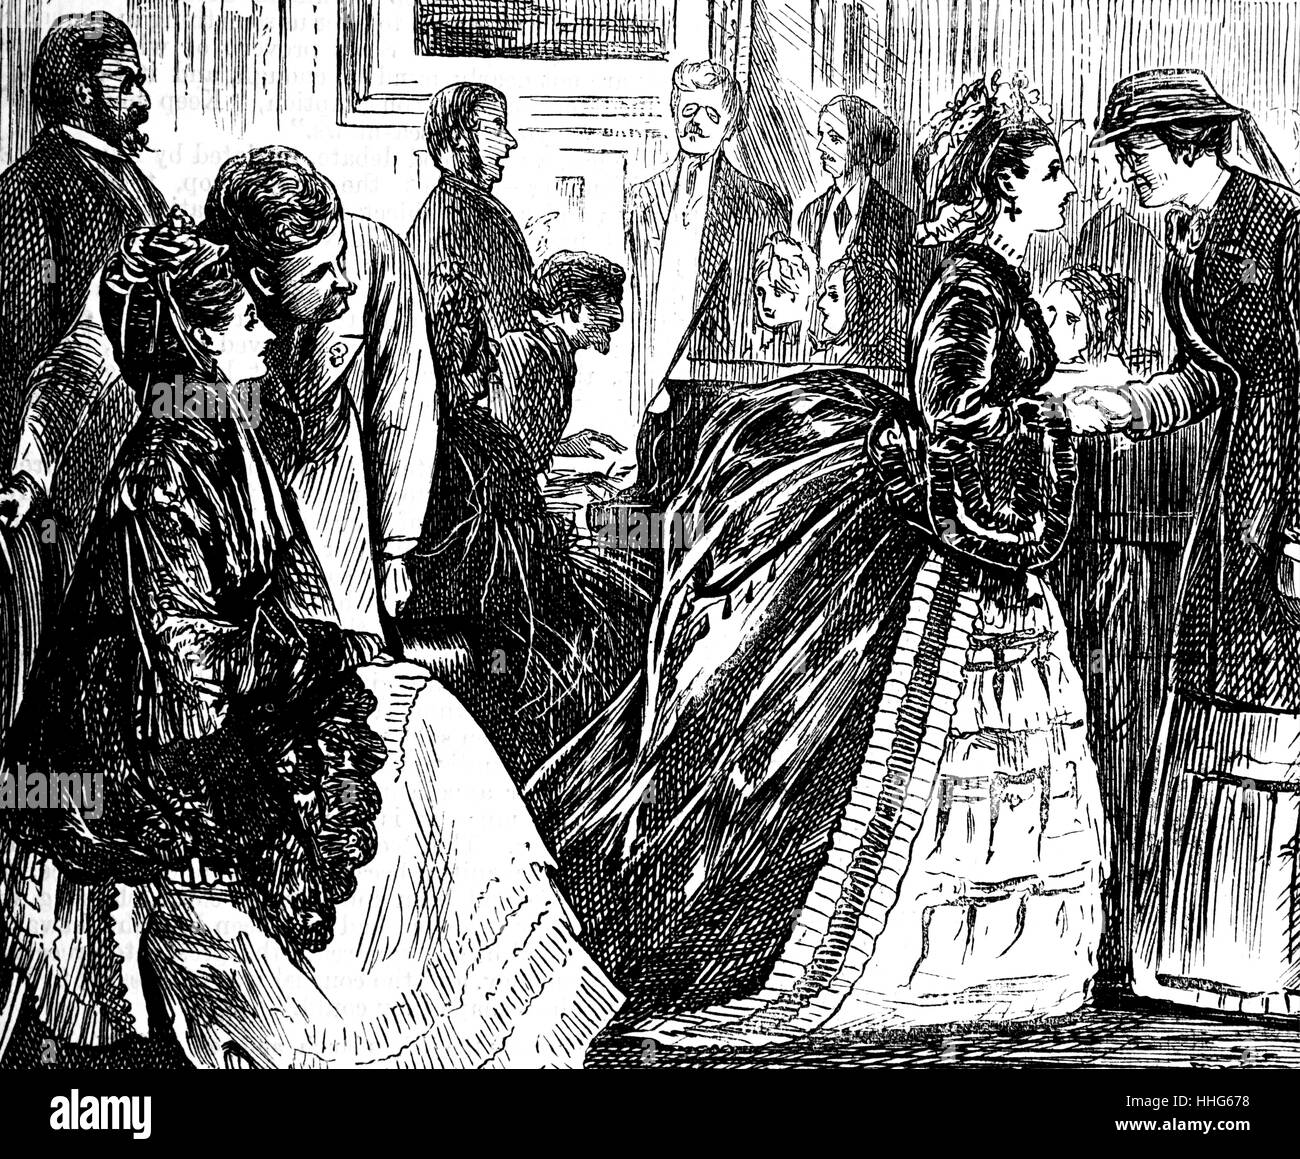 George du Maurier cartoon from 'Punch' Magazine, showing a social gathering of upper-class English gentry in fashionable clothes. 1871 Stock Photo